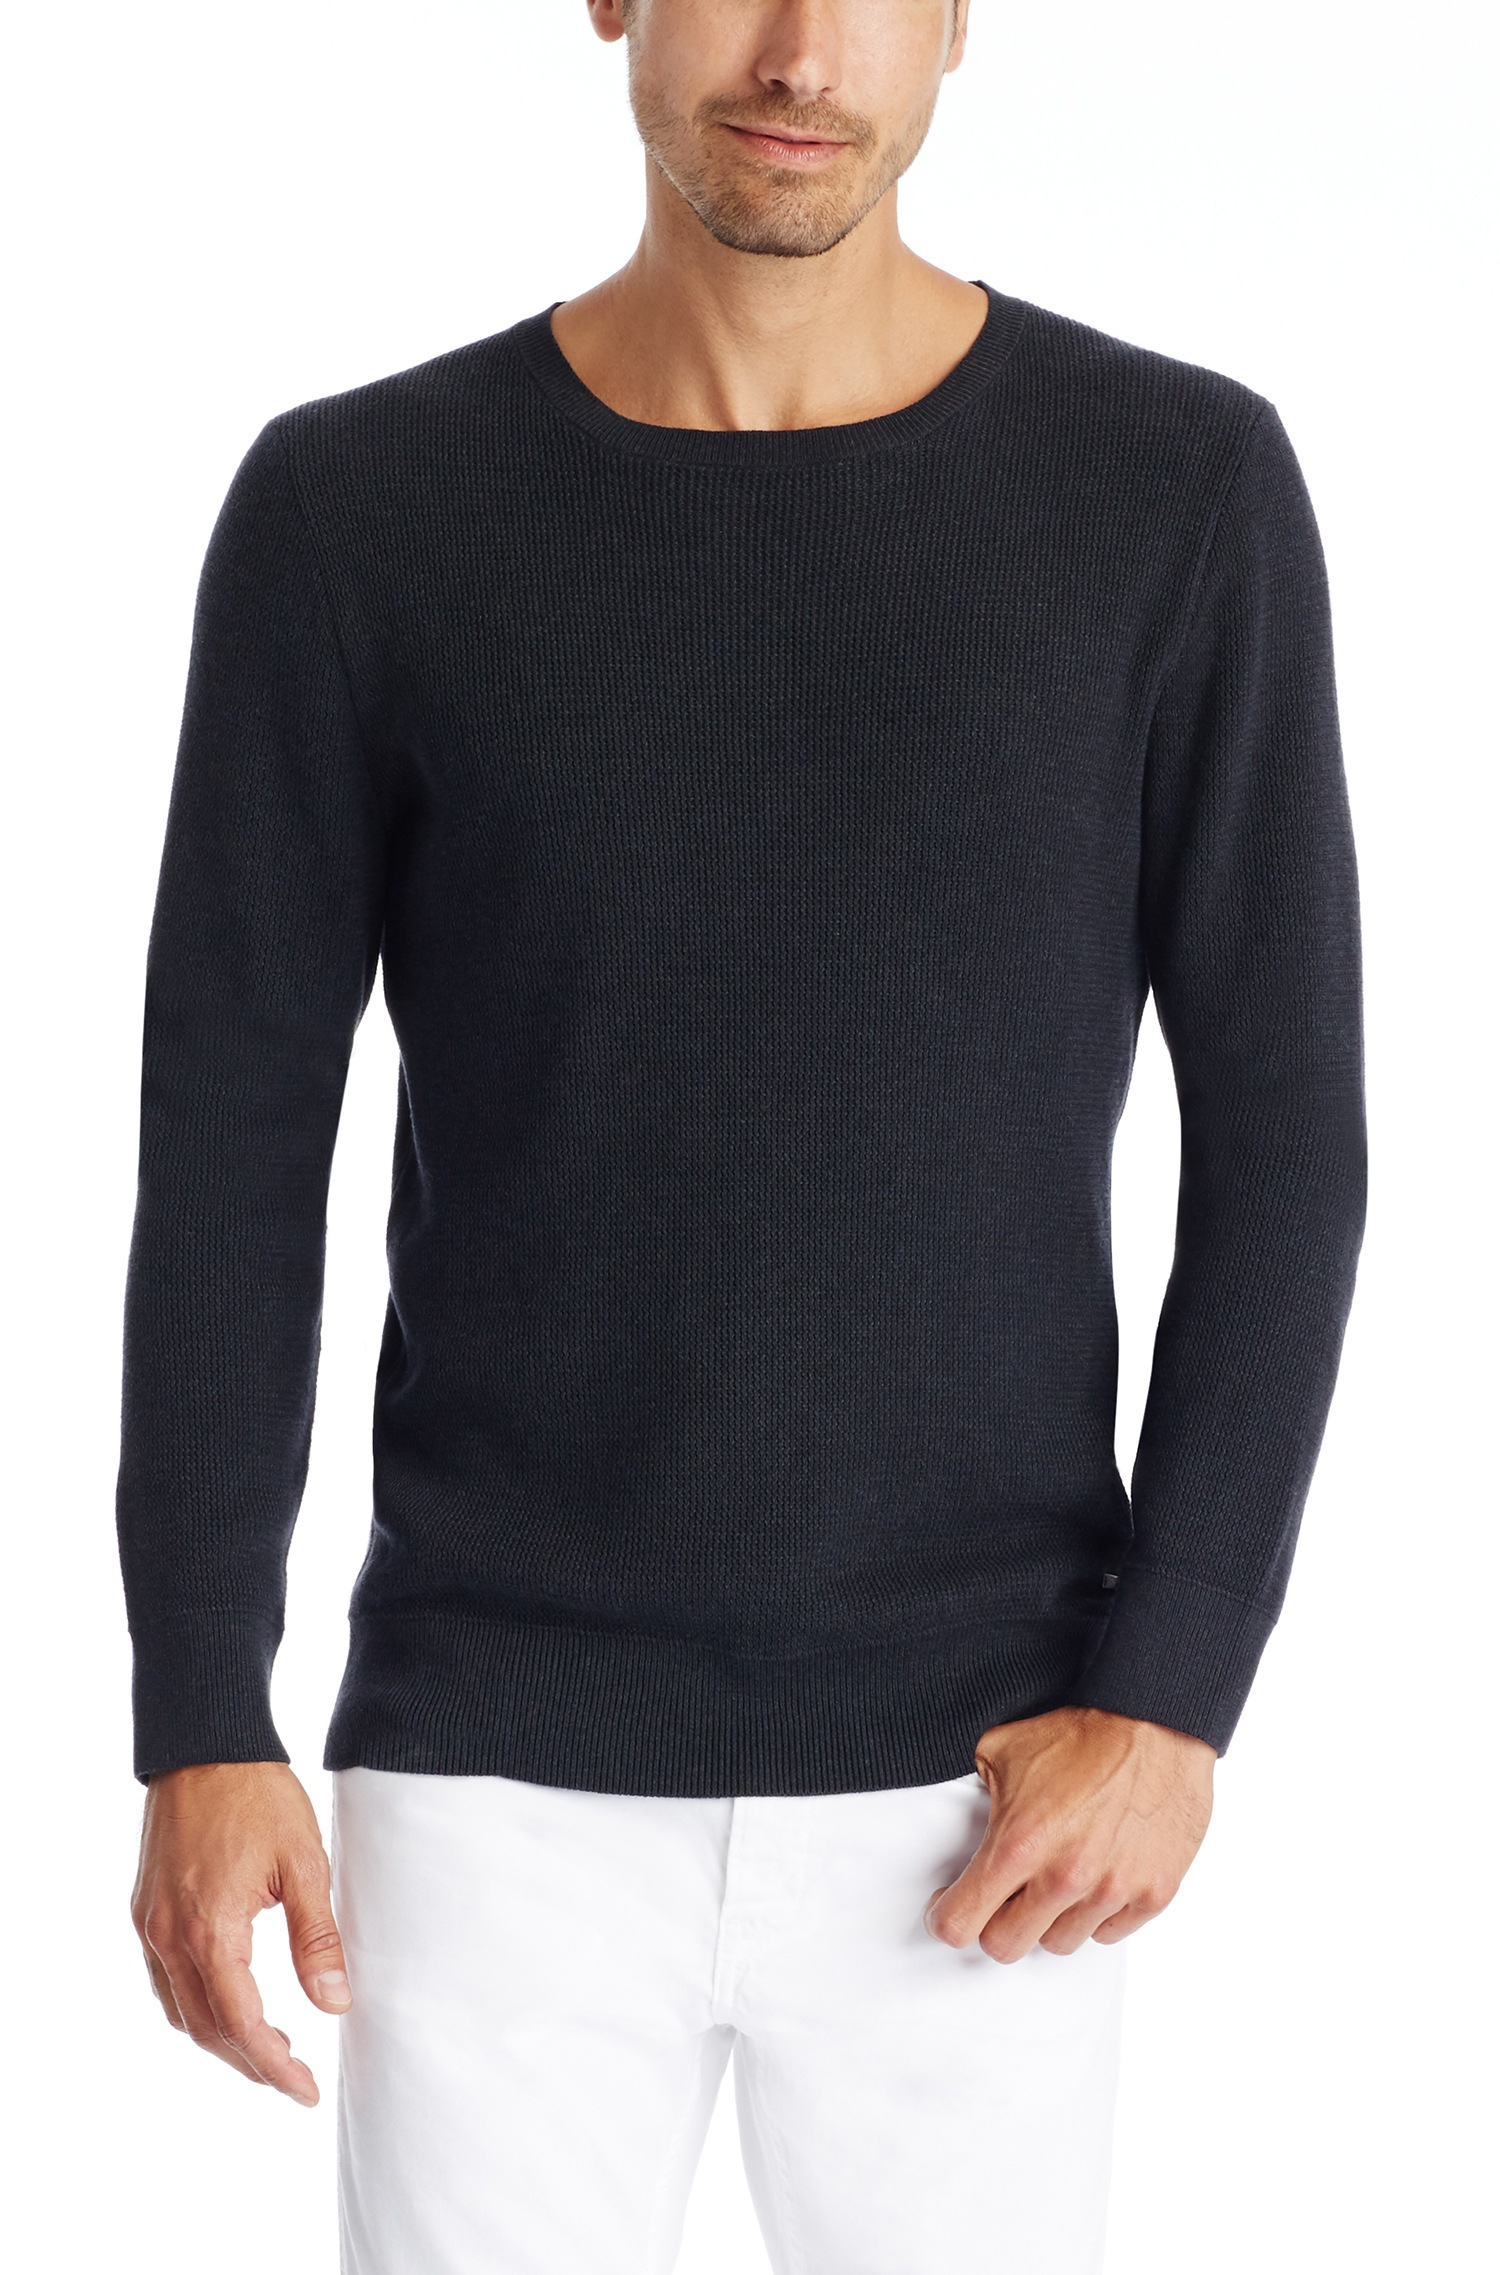 Lyst - Boss 'umballe' | Cotton Waffle Knit Sweater in Gray for Men